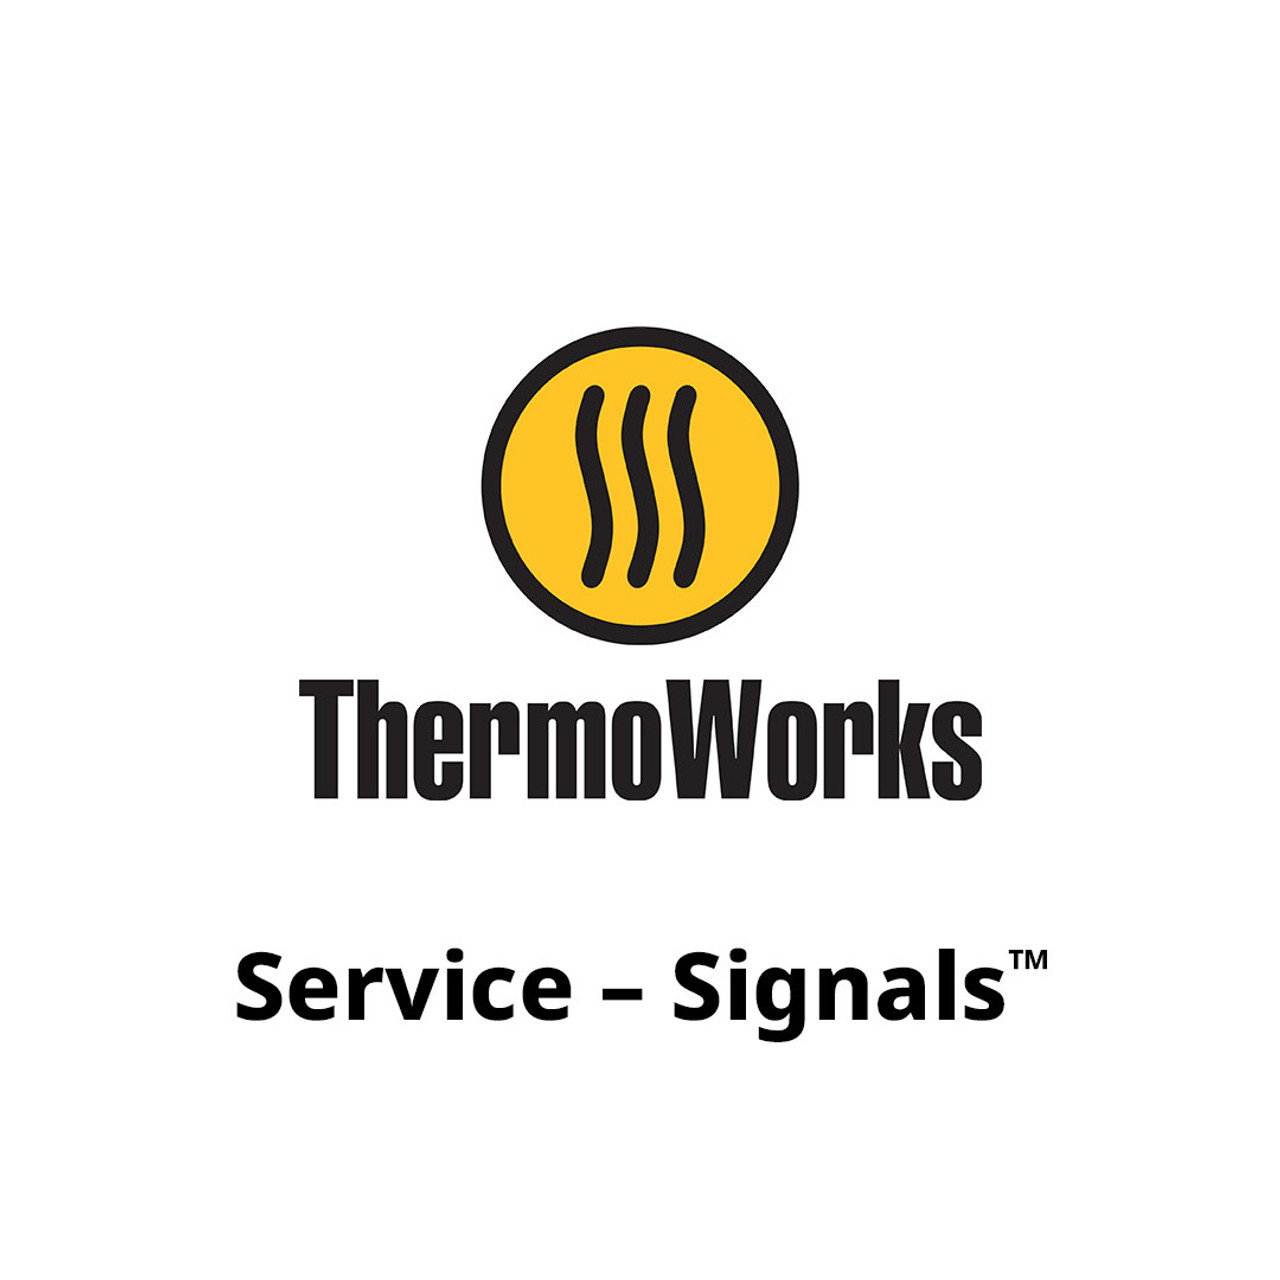 Thermoworks Signals, Expert Reviews